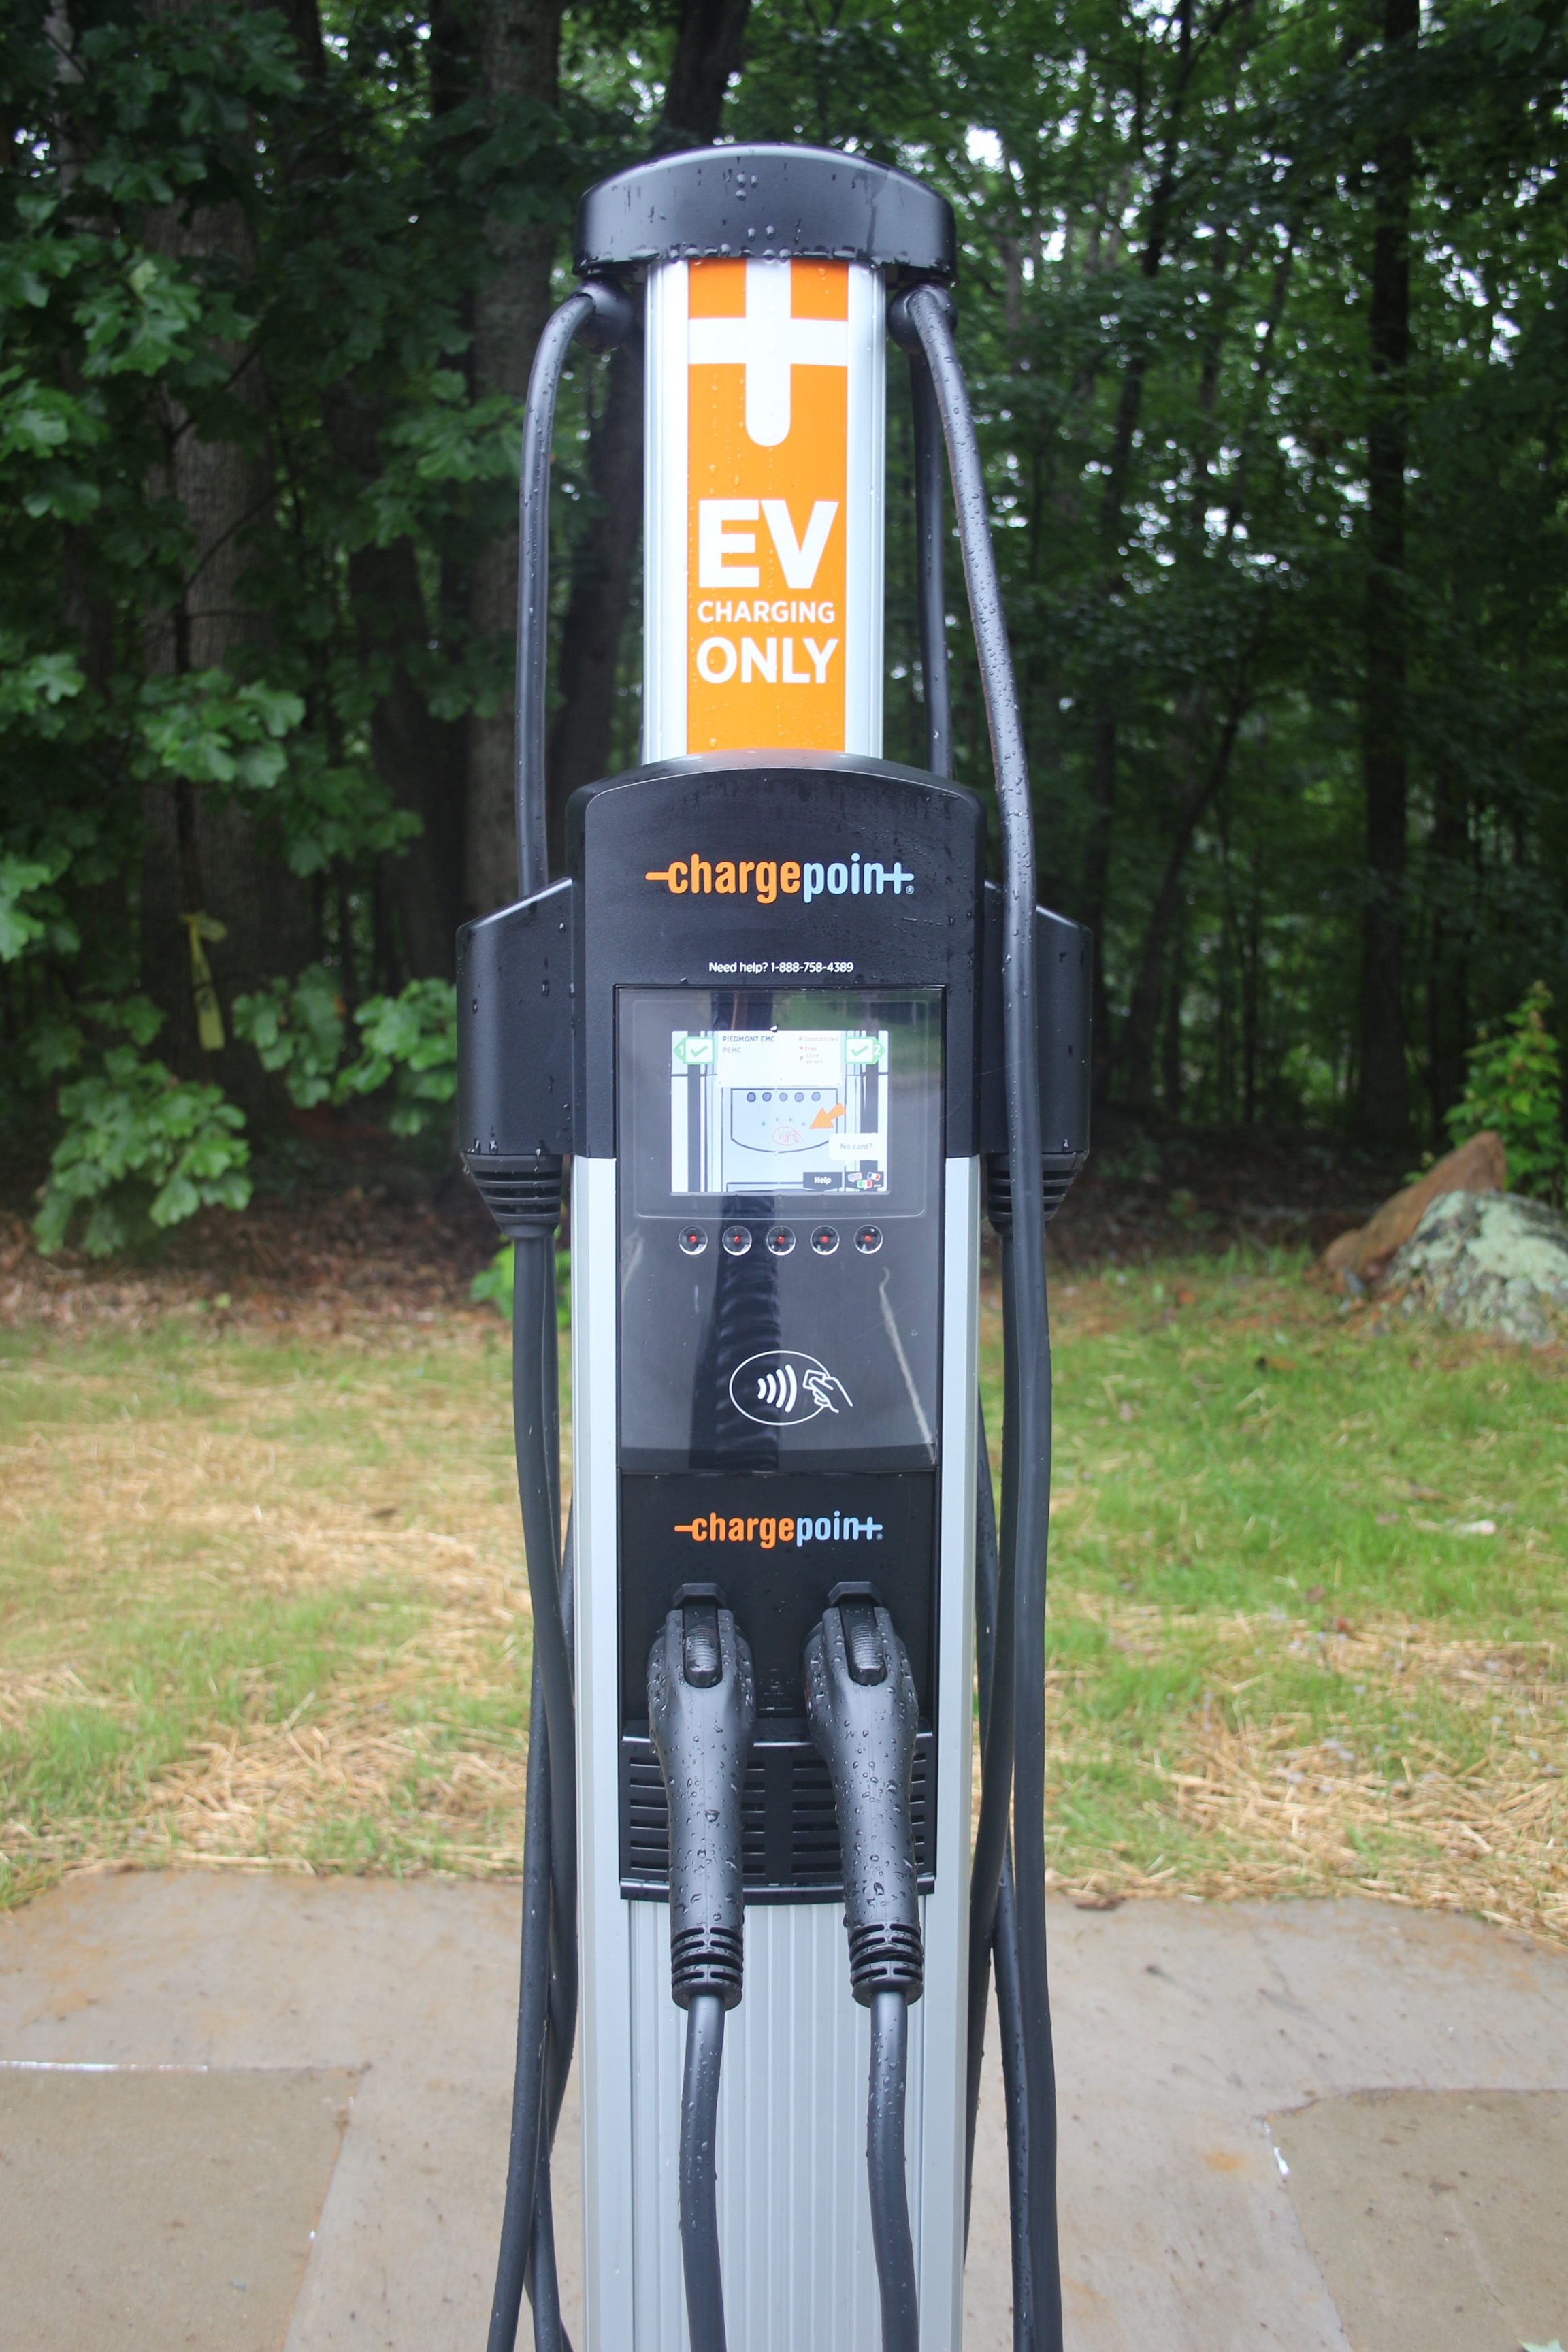 Piedmont Electric Installs Electric Vehicle Charging Station | Piedmont